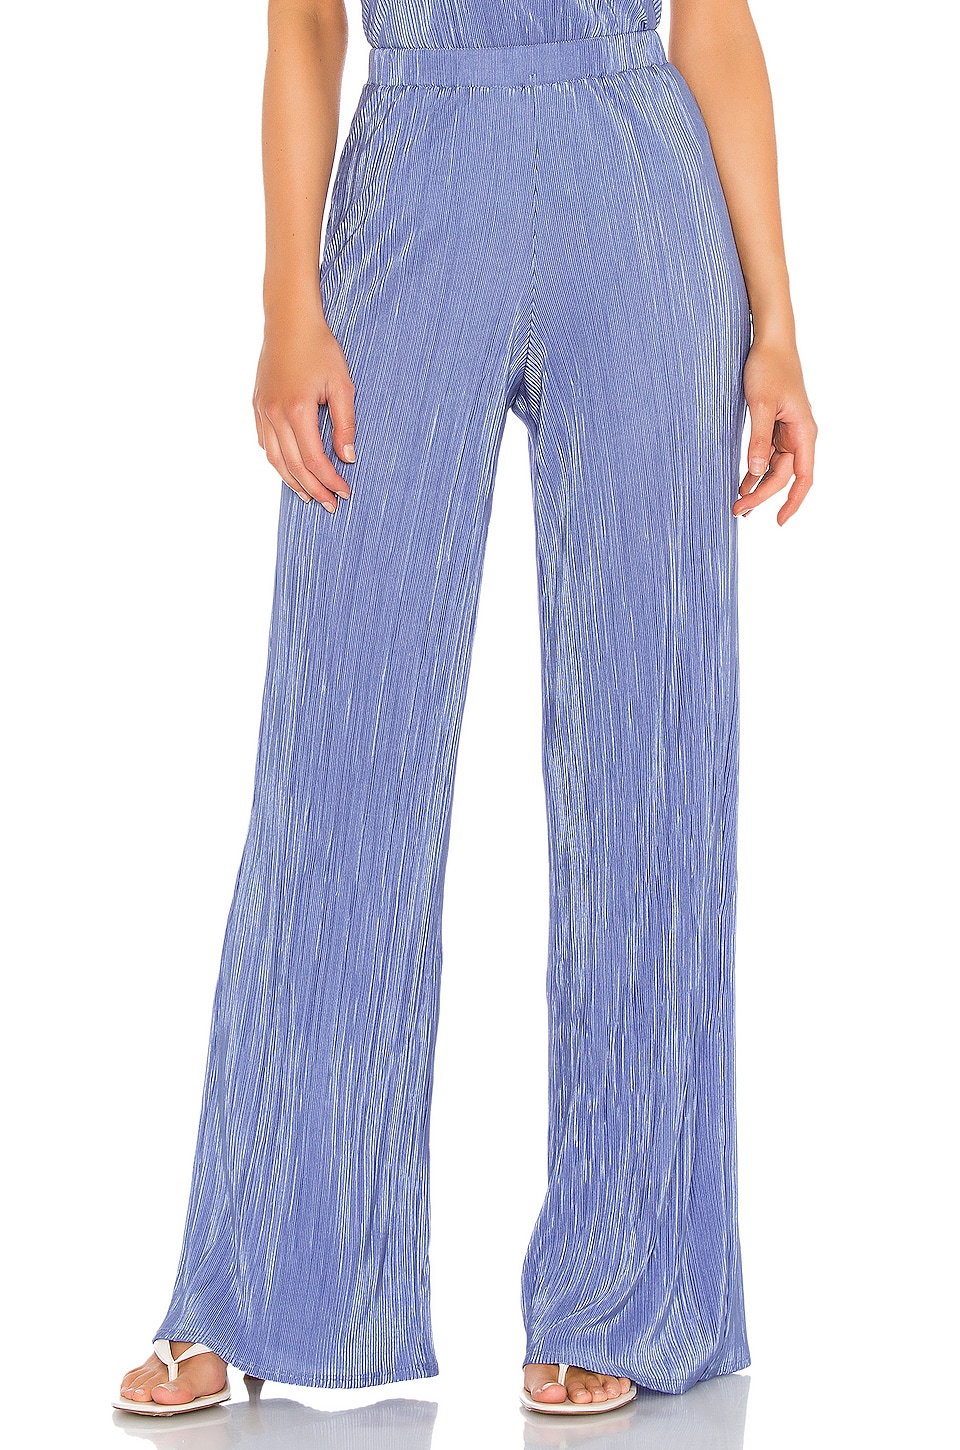 Song of Style Lucinda Pant in Lapis Blue | REVOLVE